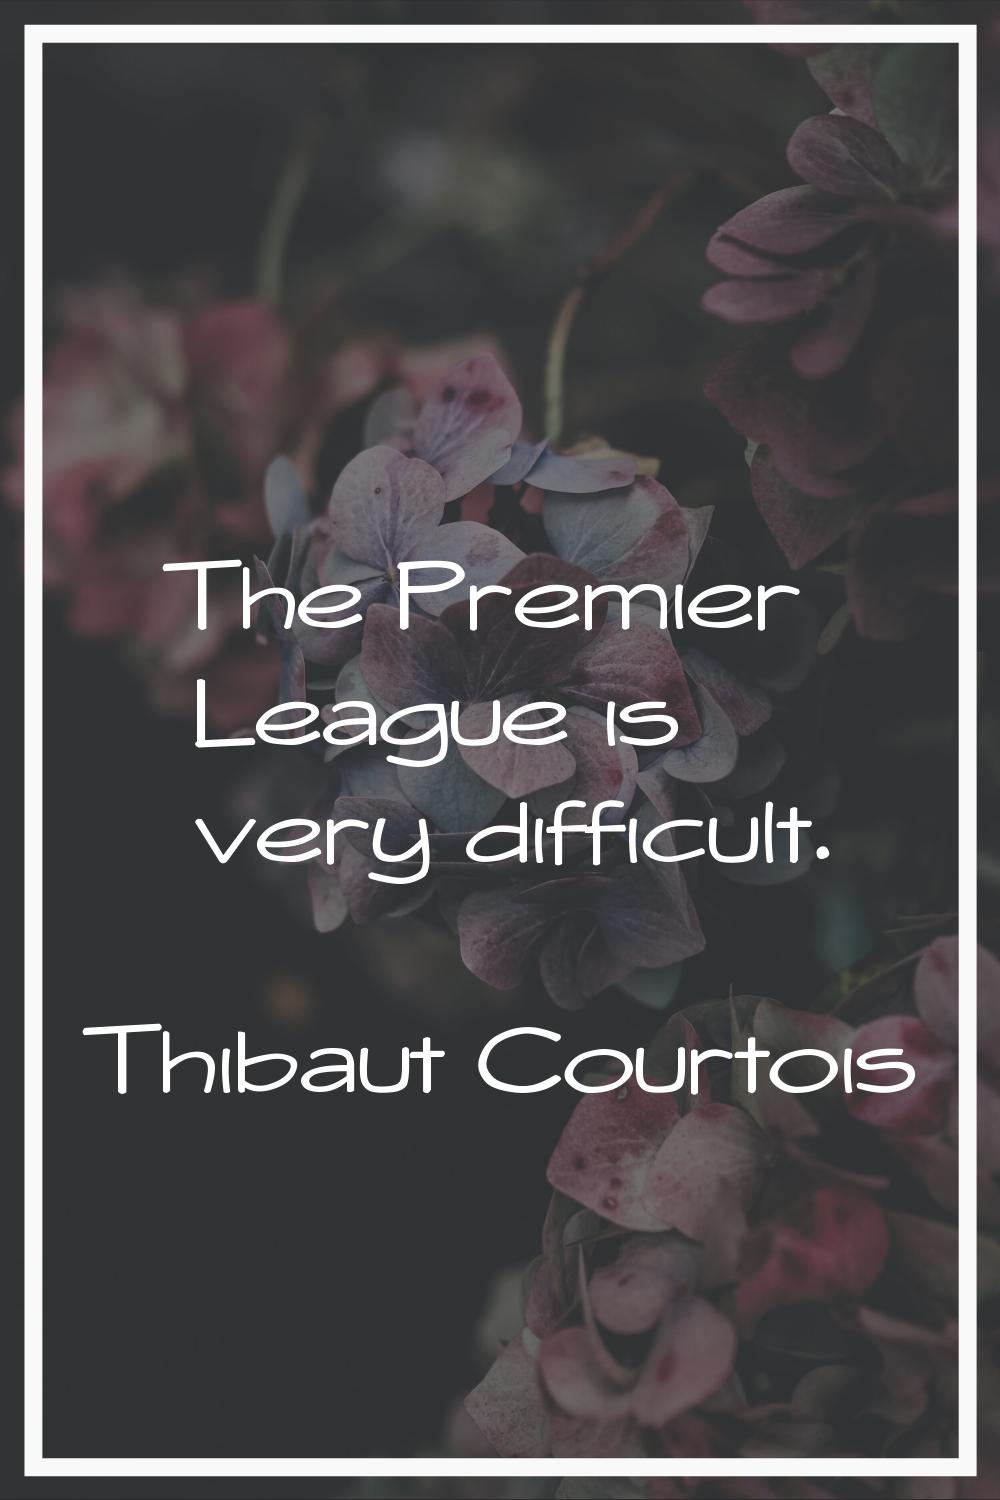 The Premier League is very difficult.